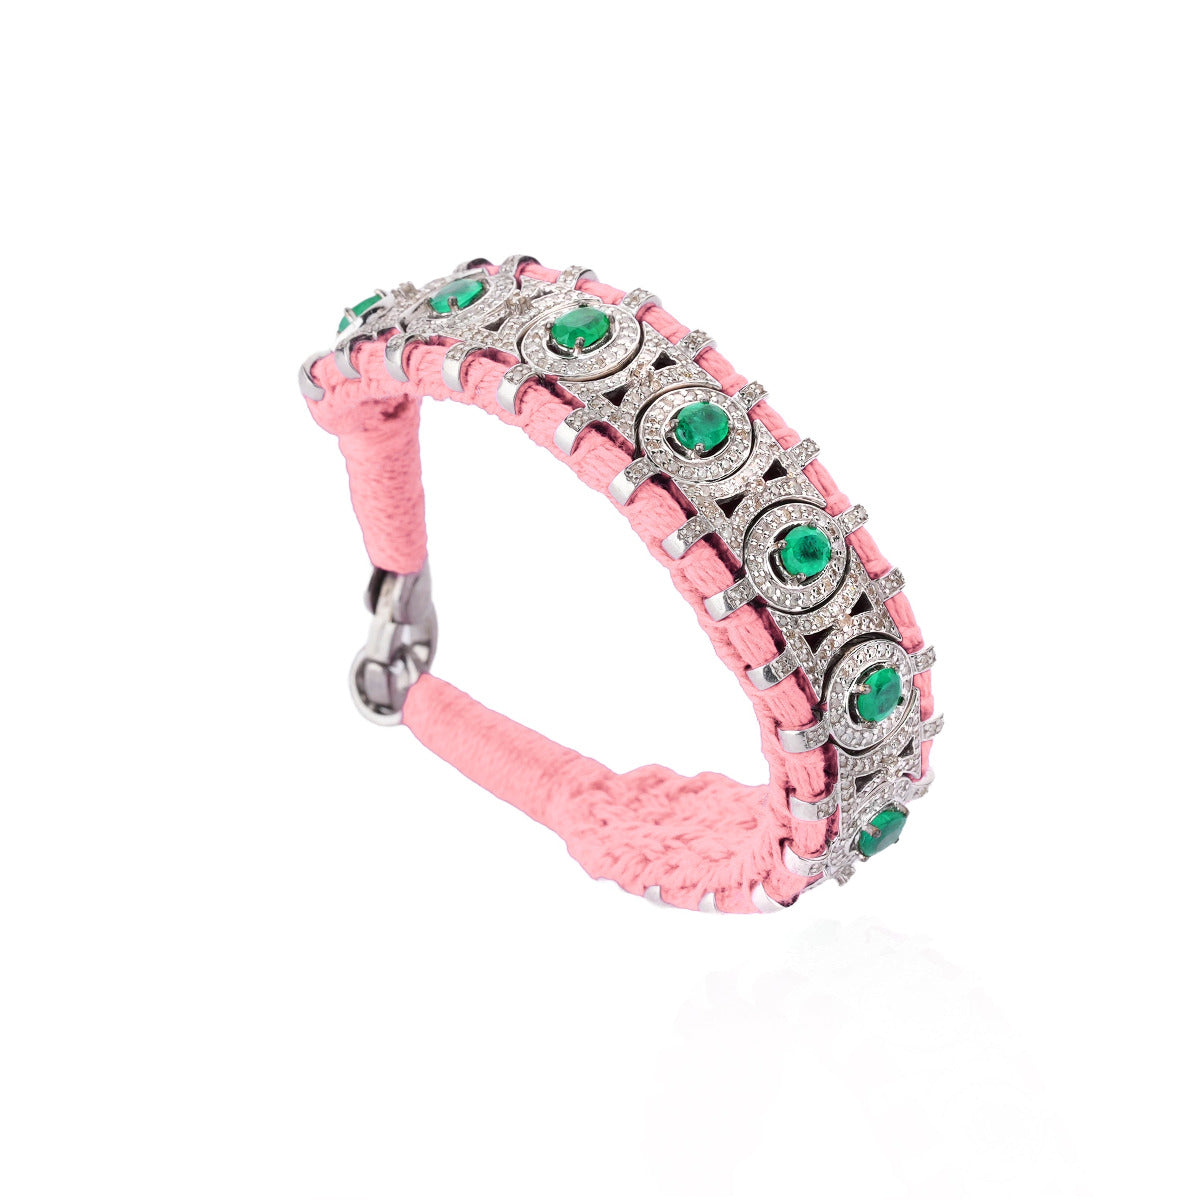 Sao Paulo Fluo Coral and Emeralds bracelet in 925 silver and diamonds